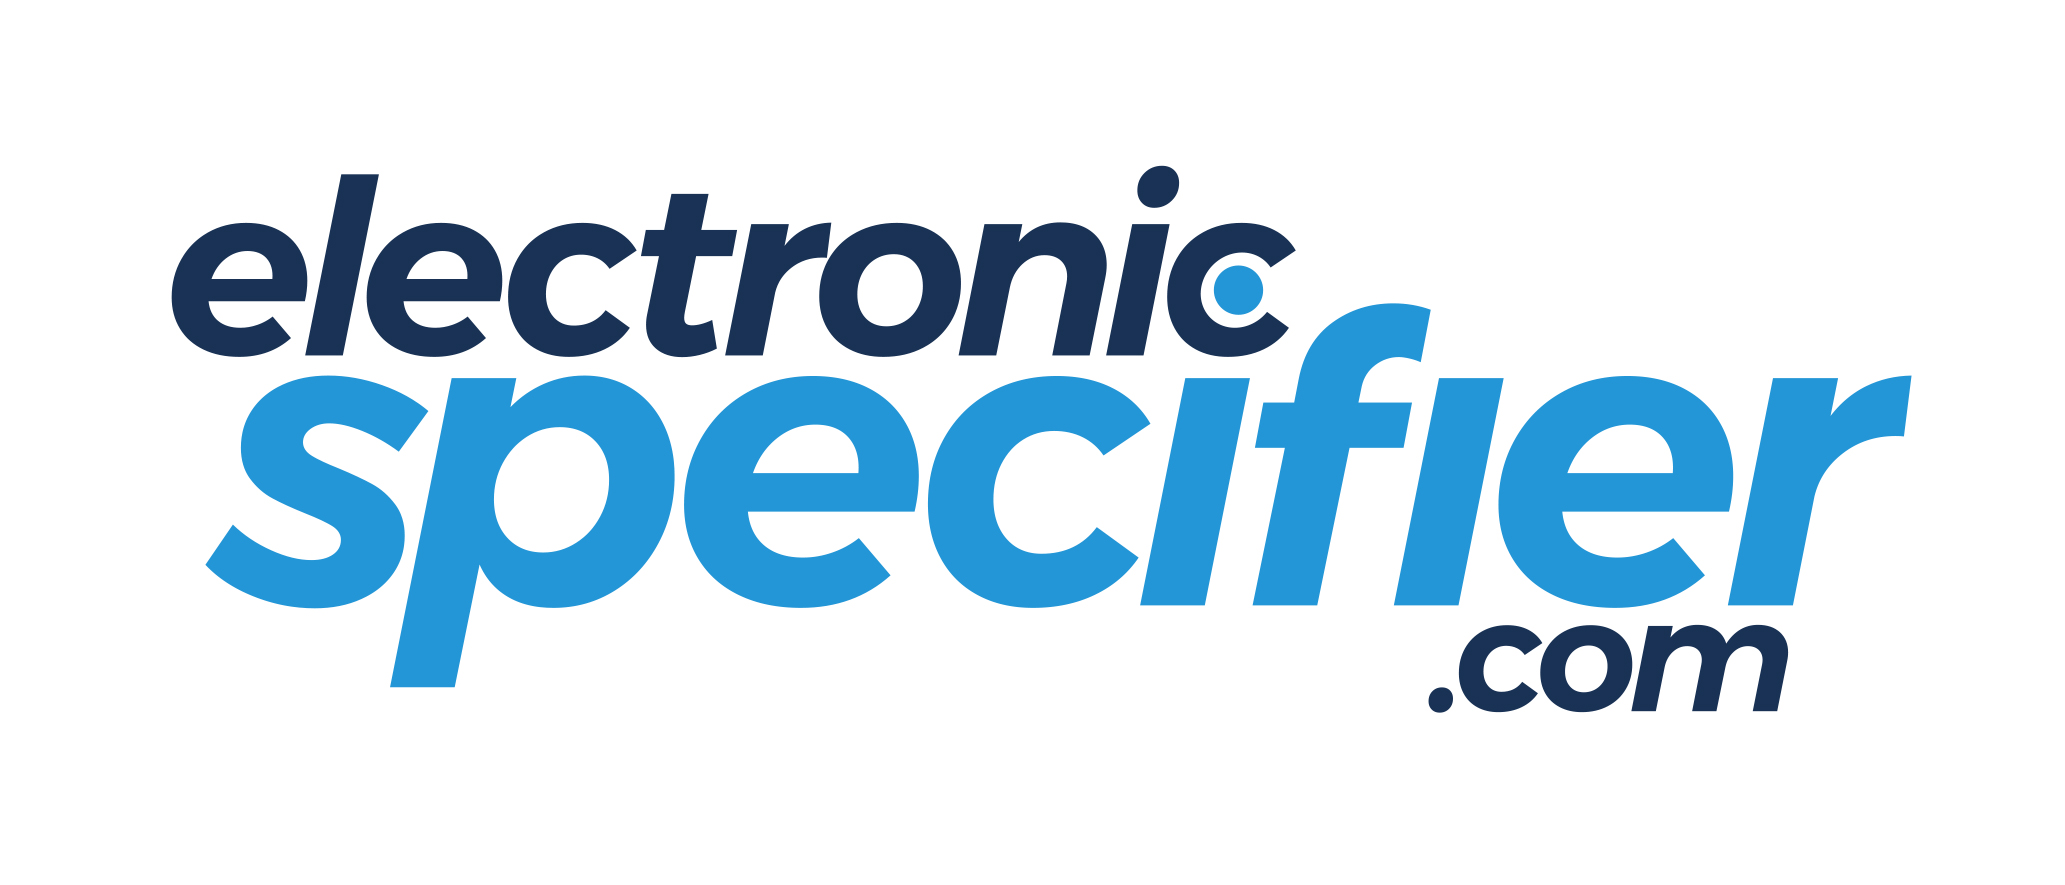 Electronic Specifier is Europe’s premier publisher of information resources to the Global Electronics Industry.